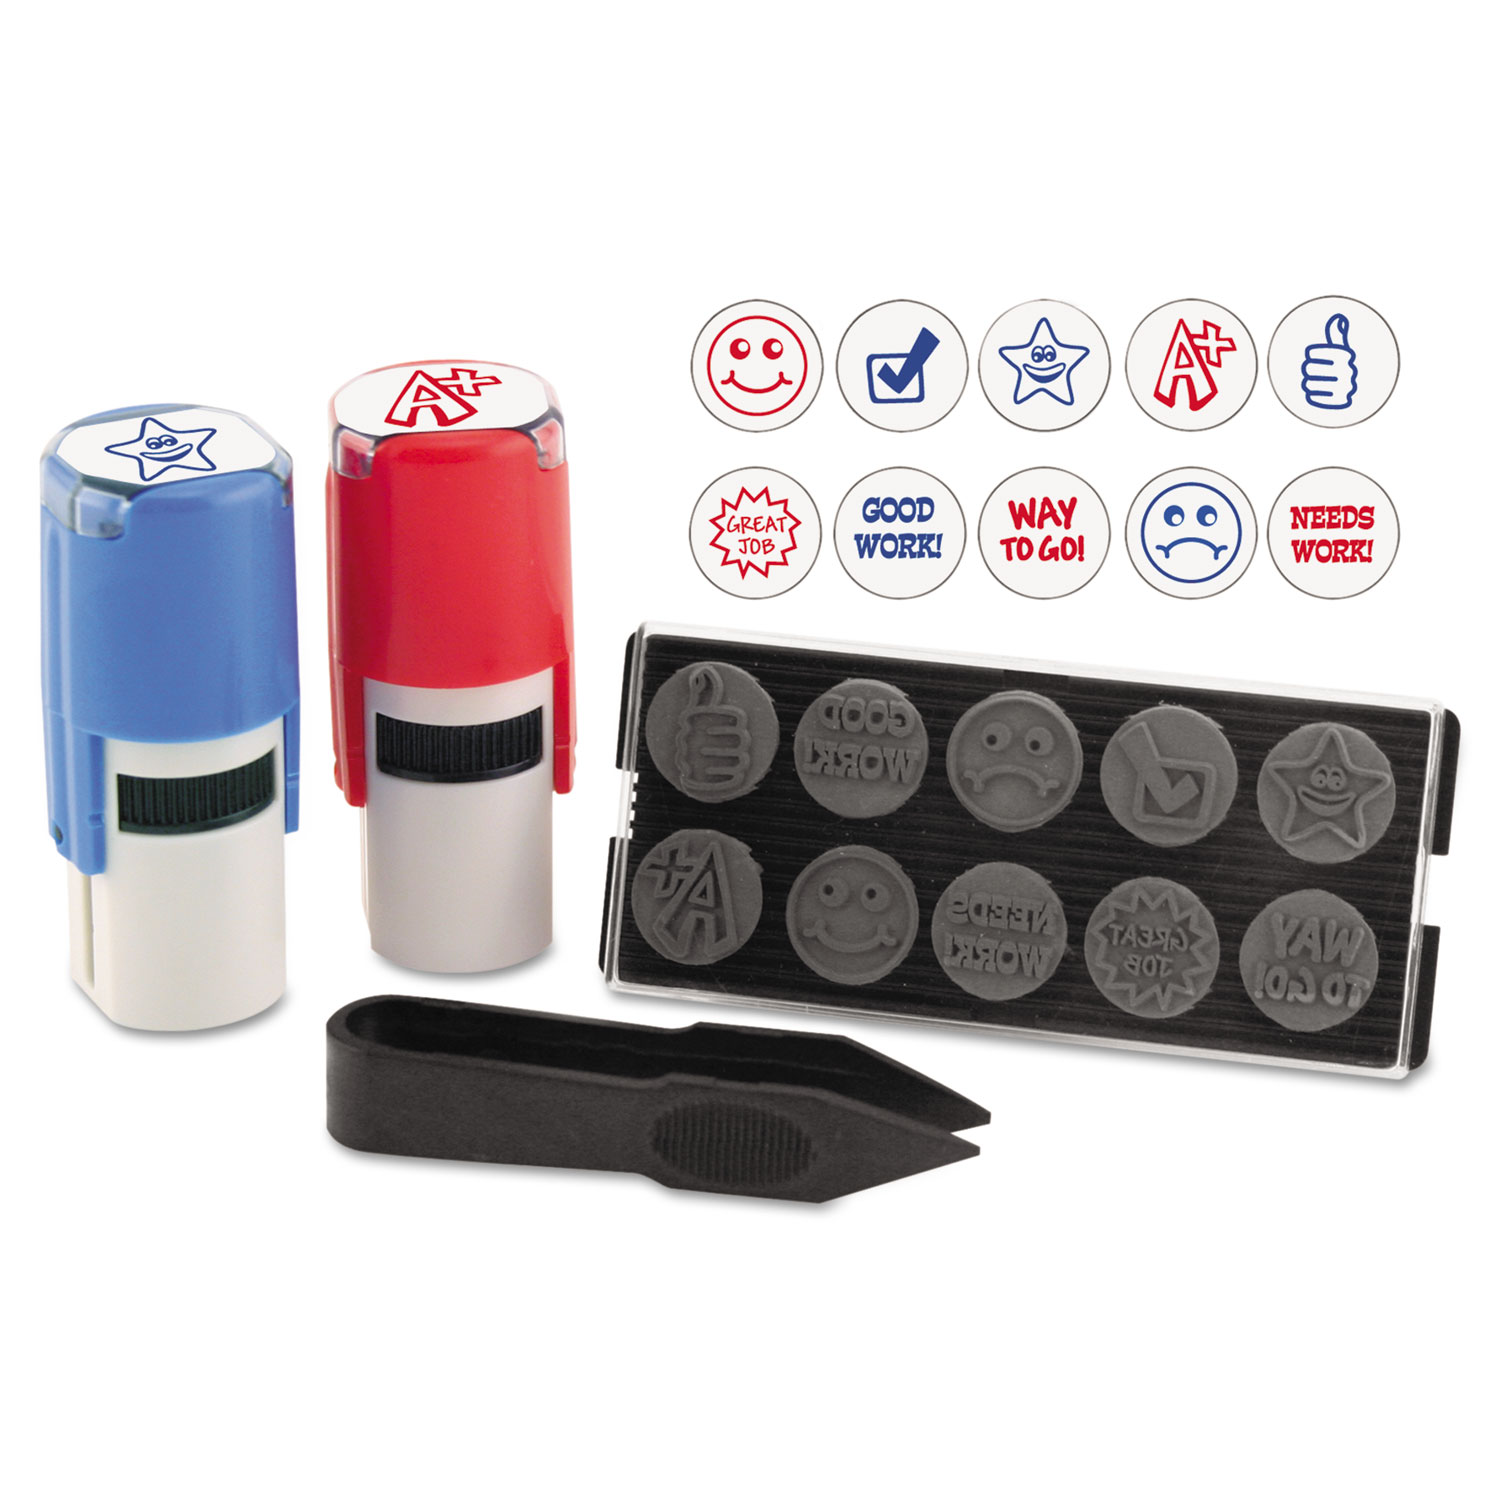  Stamp-Ever 4630 Stamp-Ever Stamp, Self-Inking with 10 Dies, 5/8, Blue/Red (USS4630) 